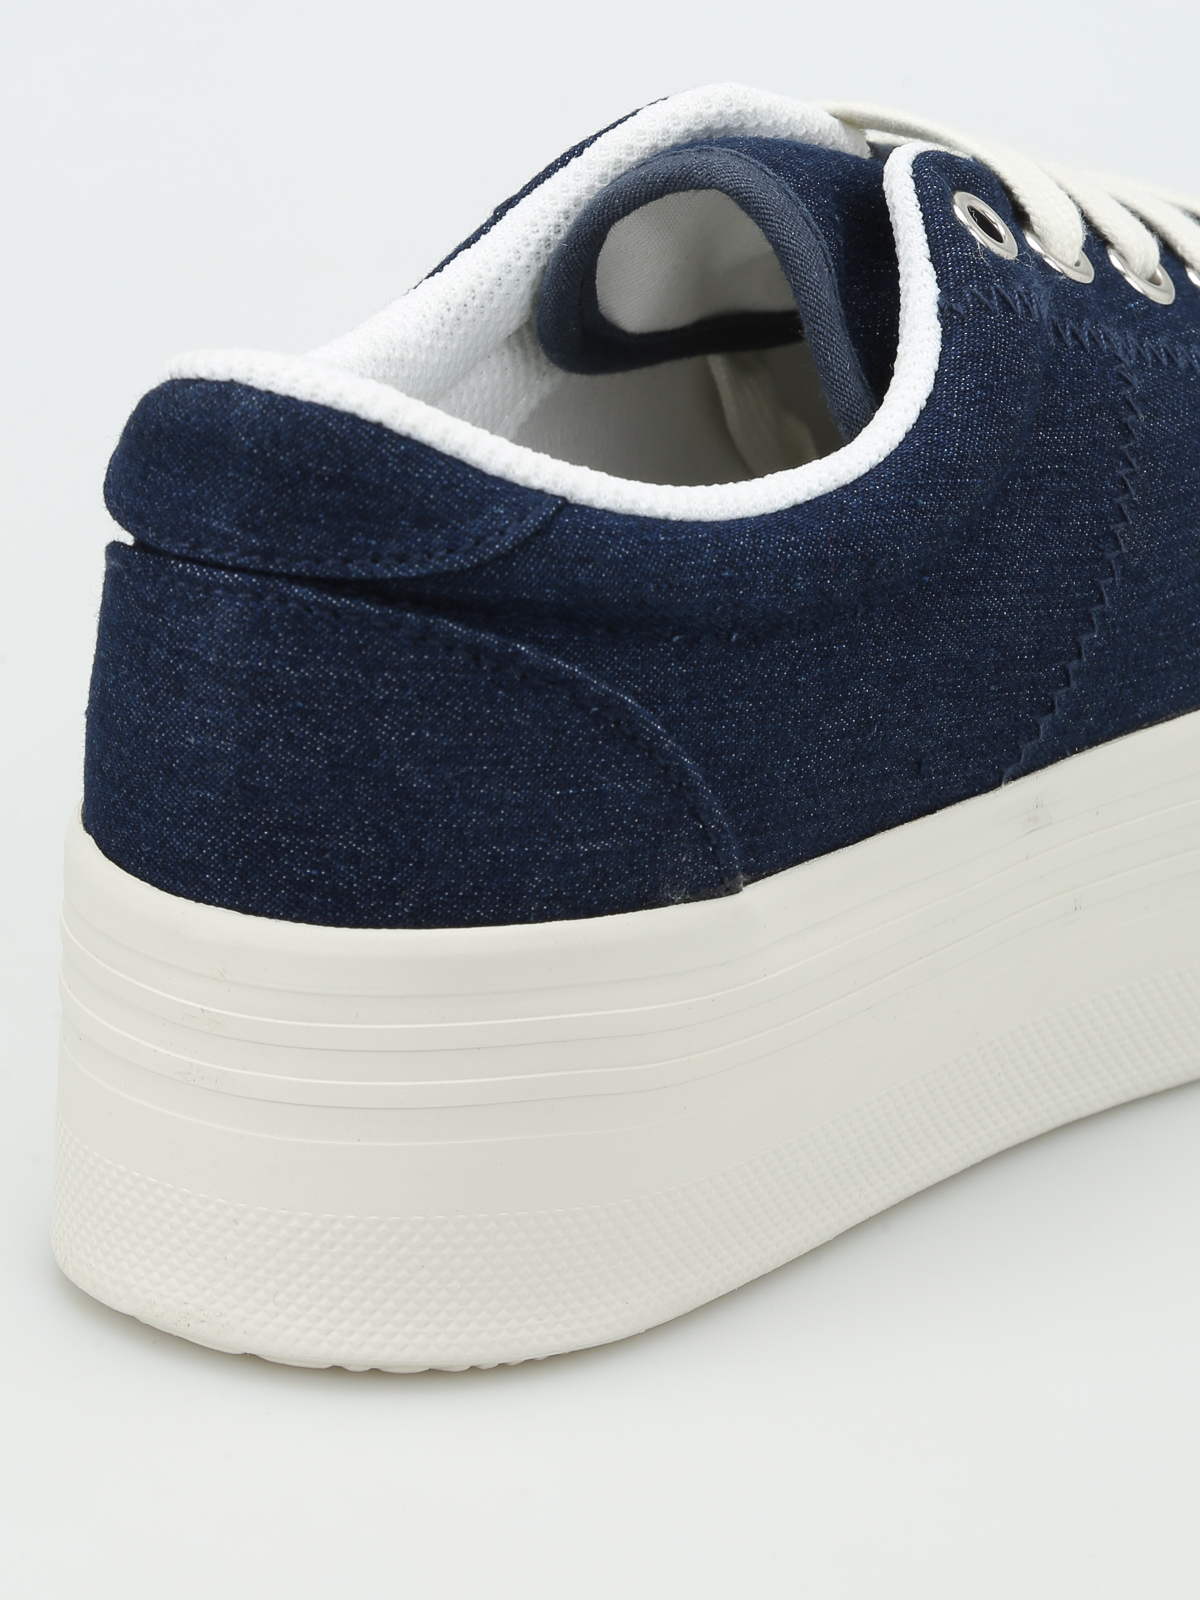 Trainers Campbell - canvas sneakers - ZOMGBLUDENIM